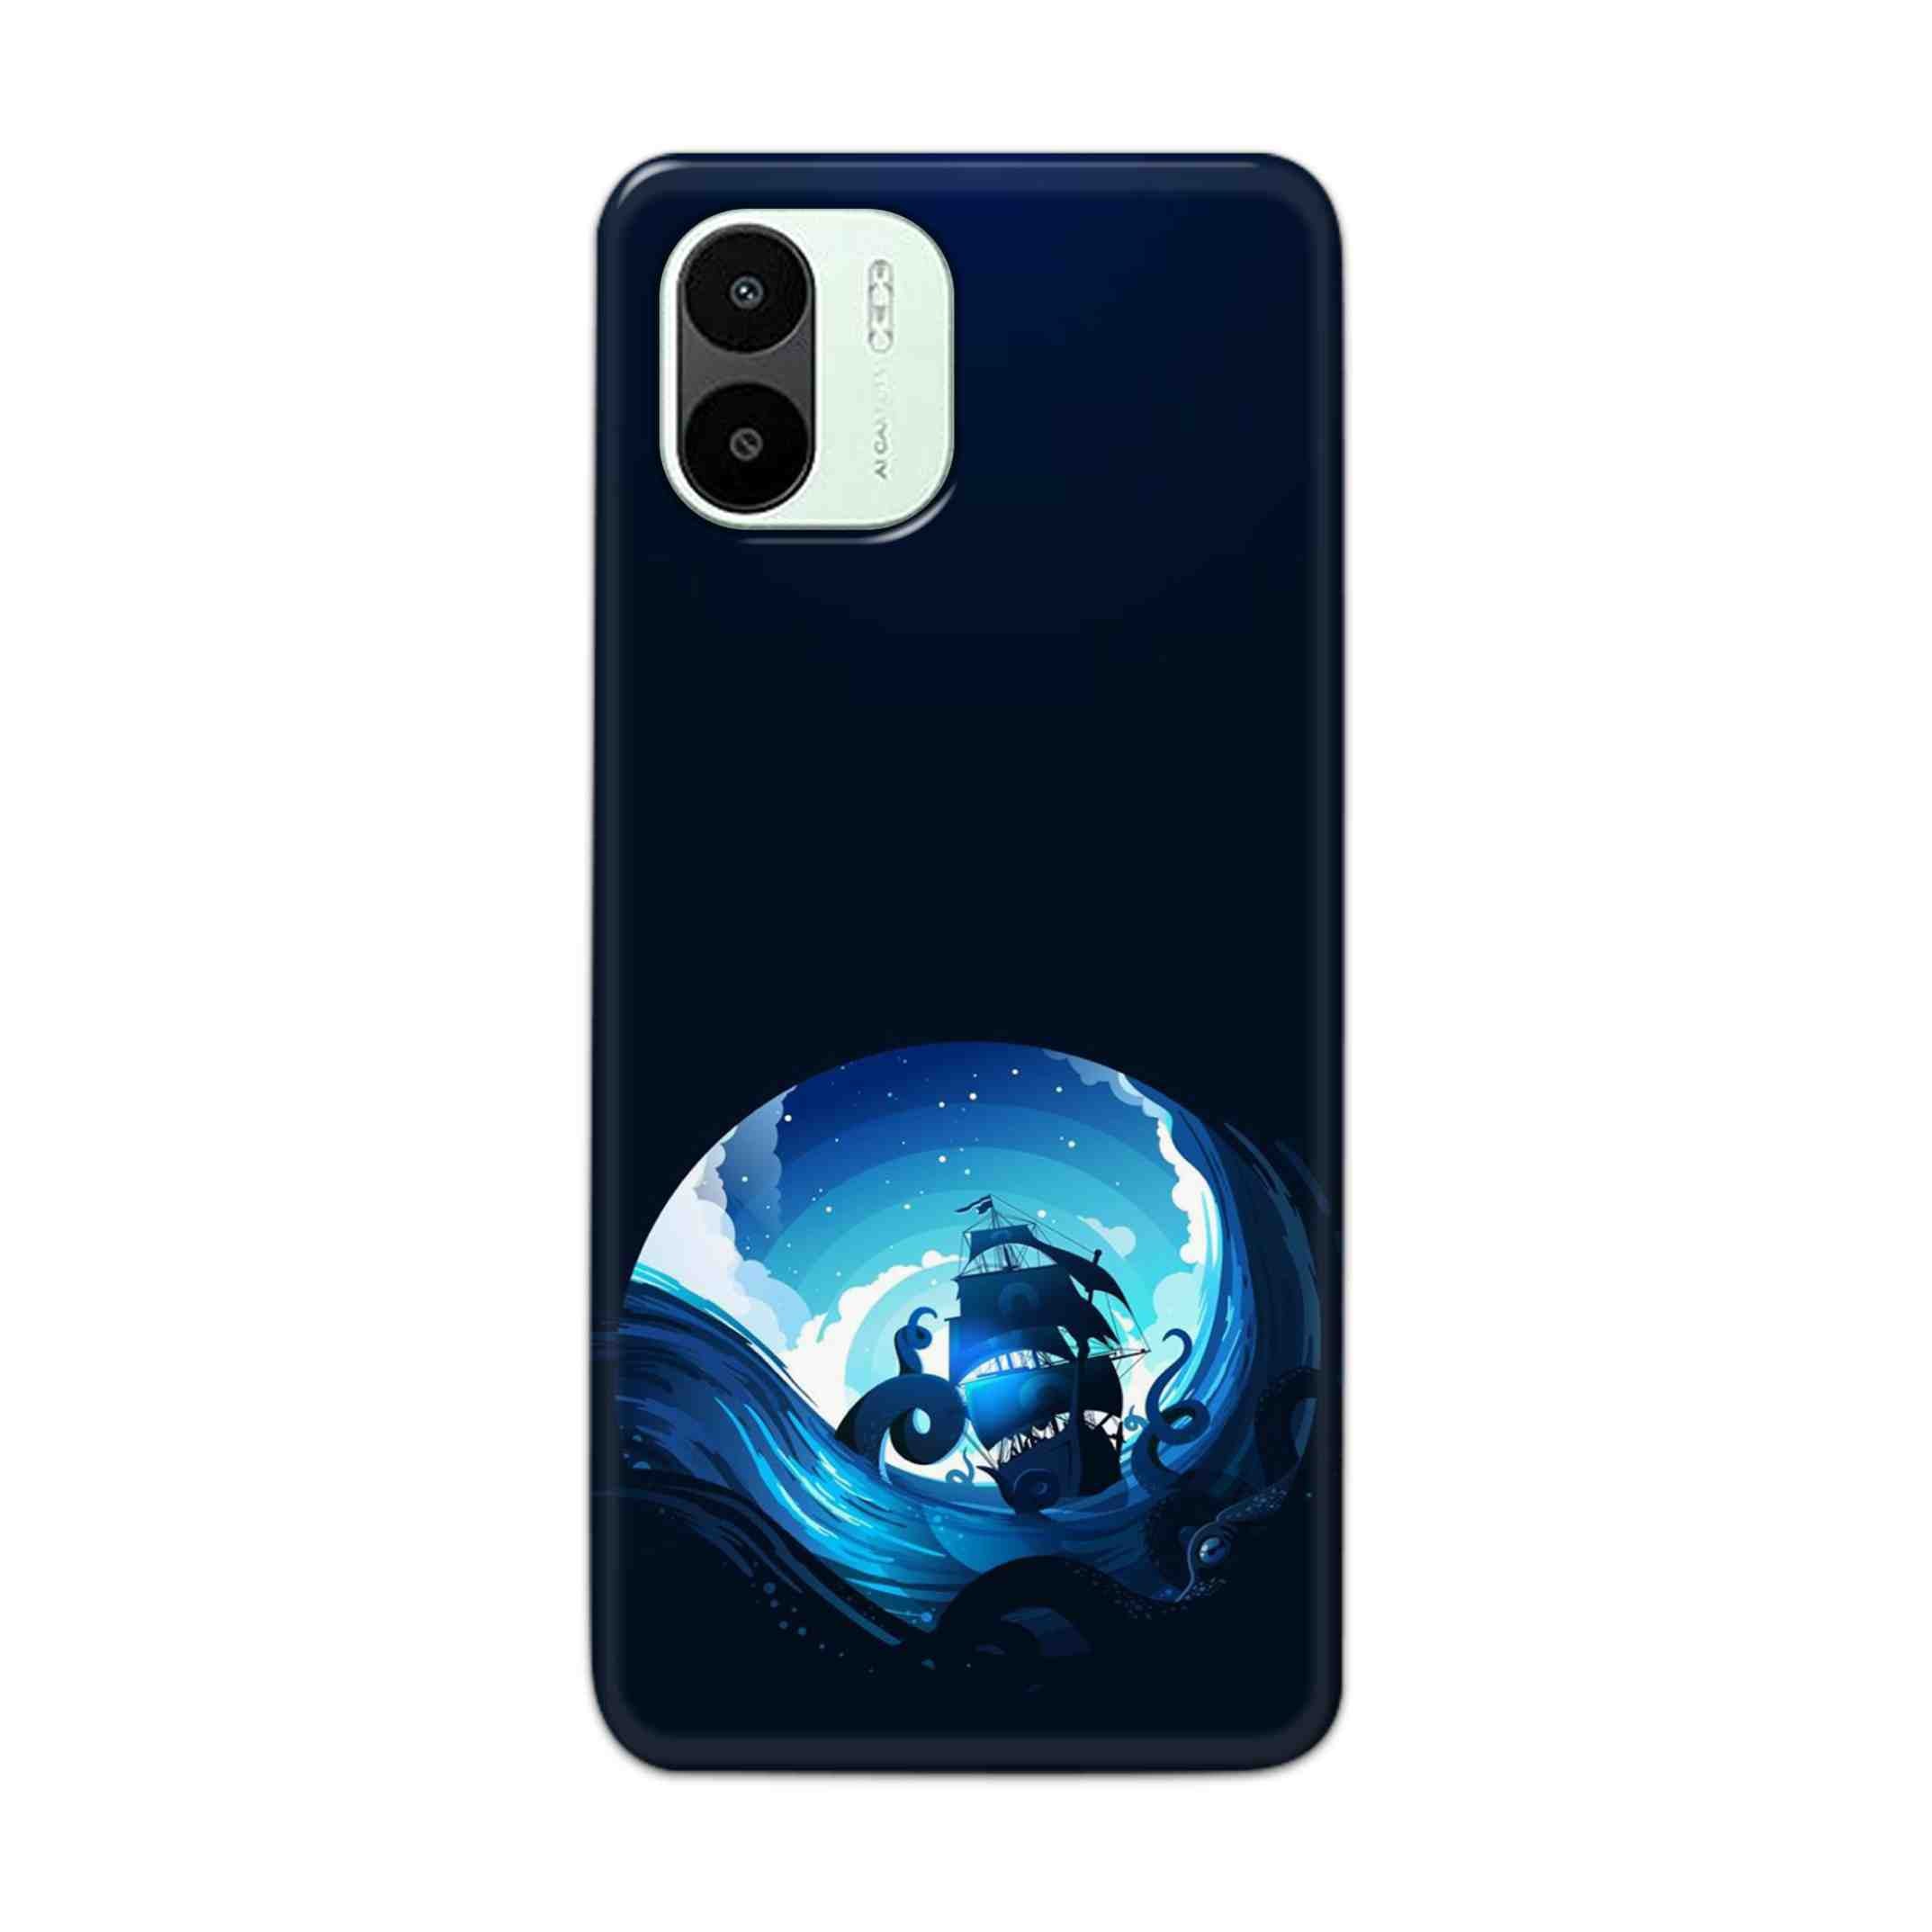 Buy Blue Sea Ship Hard Back Mobile Phone Case Cover For Xiaomi Redmi A1 5G Online